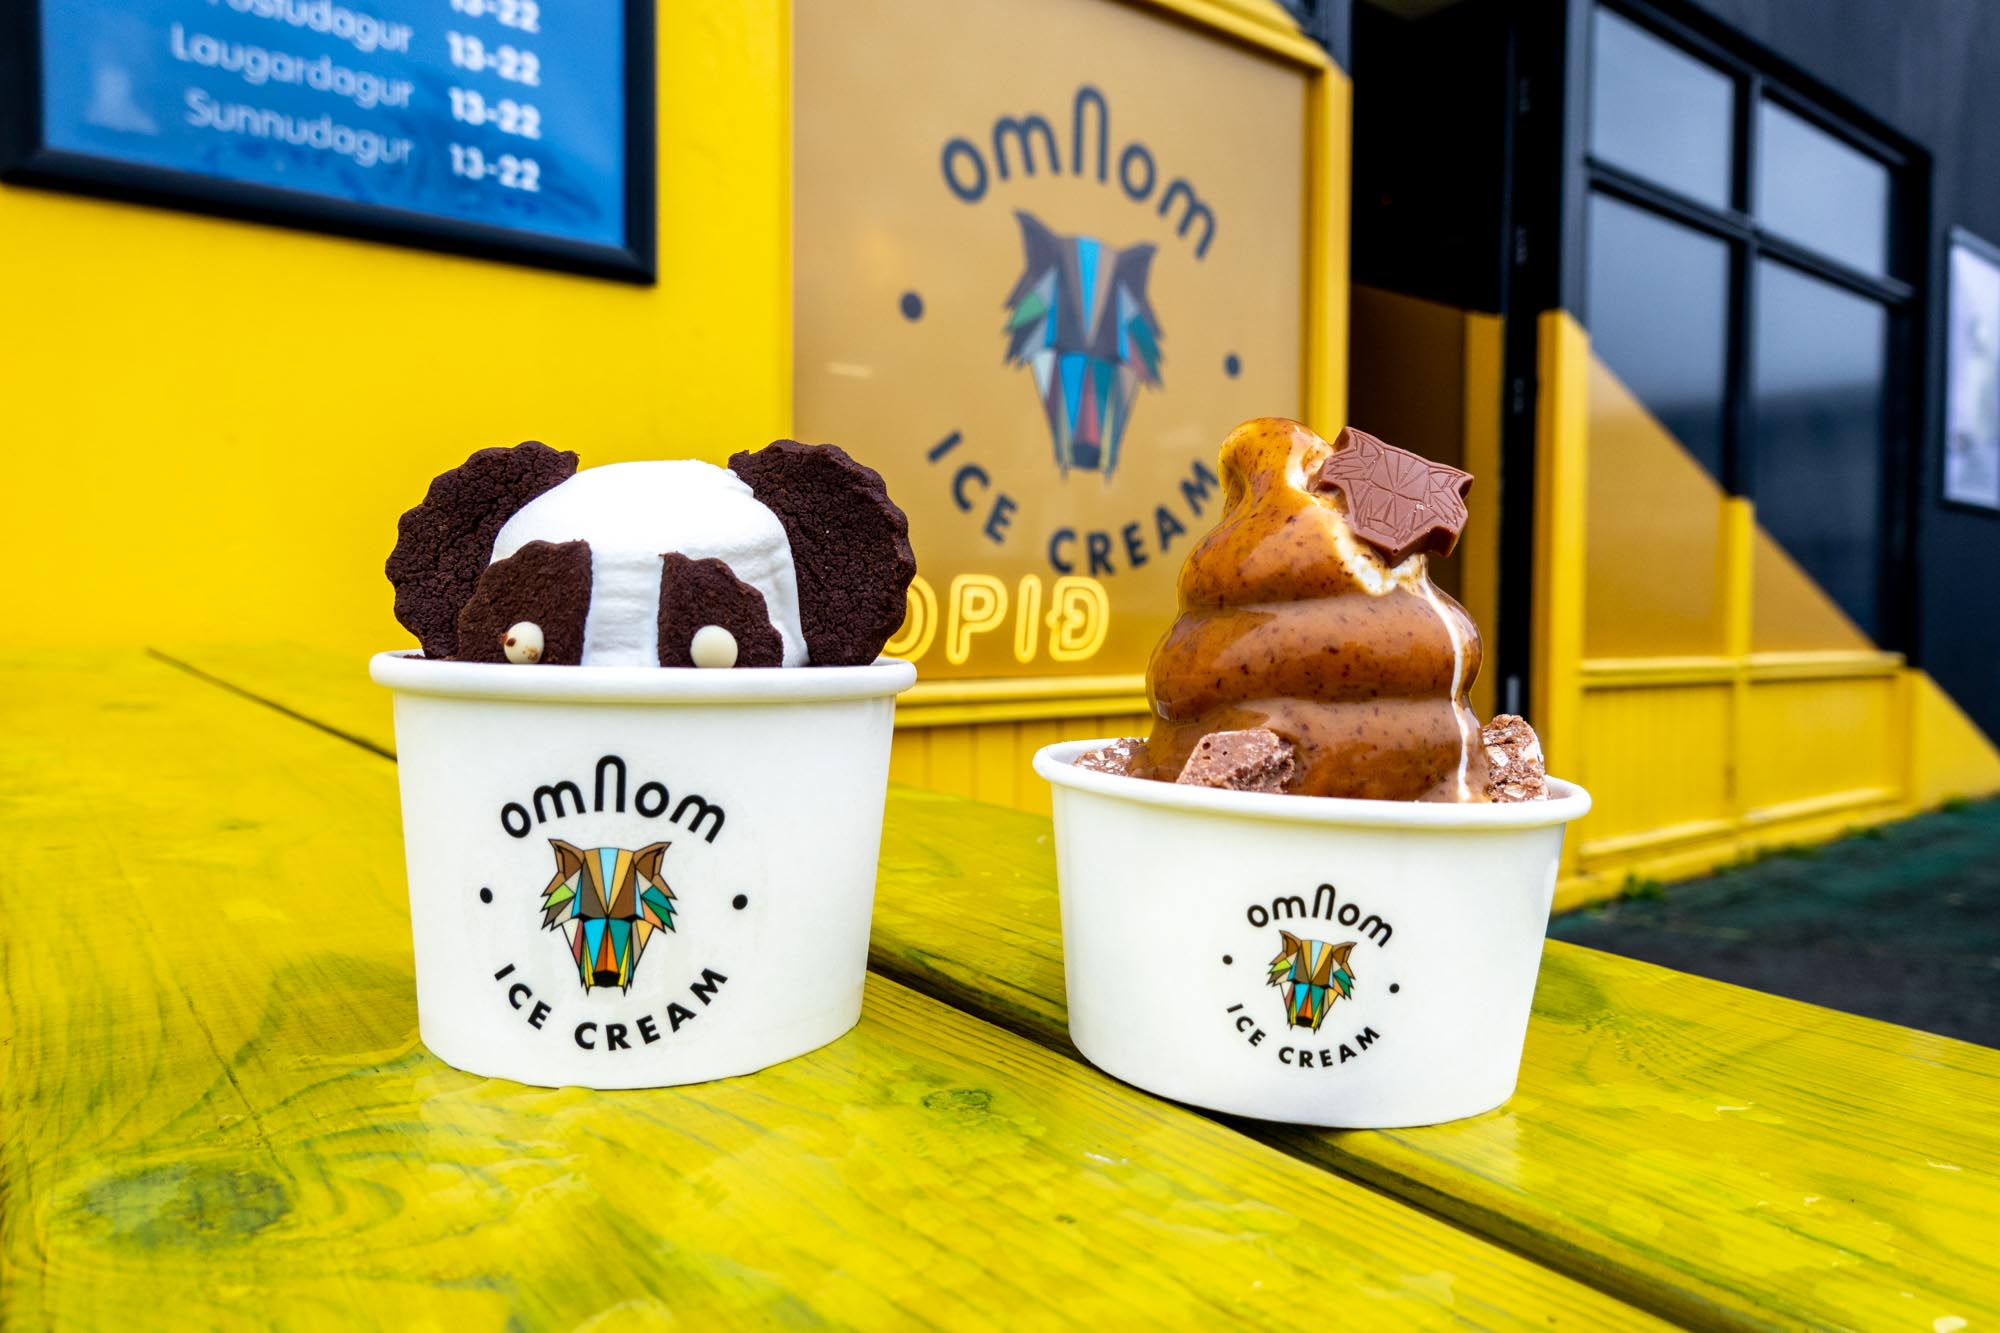 Ice cream in cups on a yellow picnic table in front of a sign for Omnom ice cream